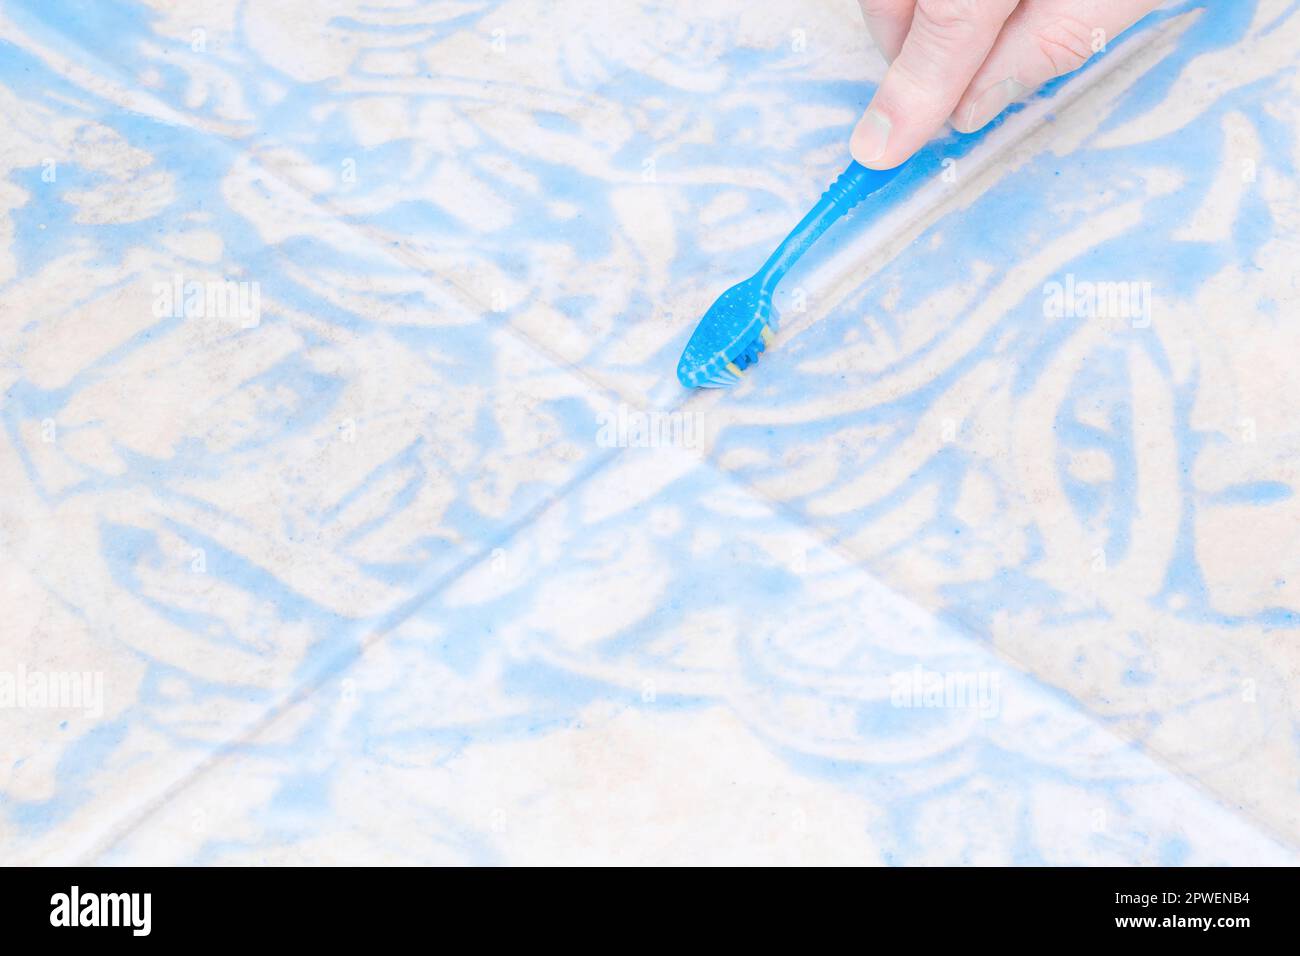 Scrubbing and cleaning floor tiles with a toothbrush Stock Photo